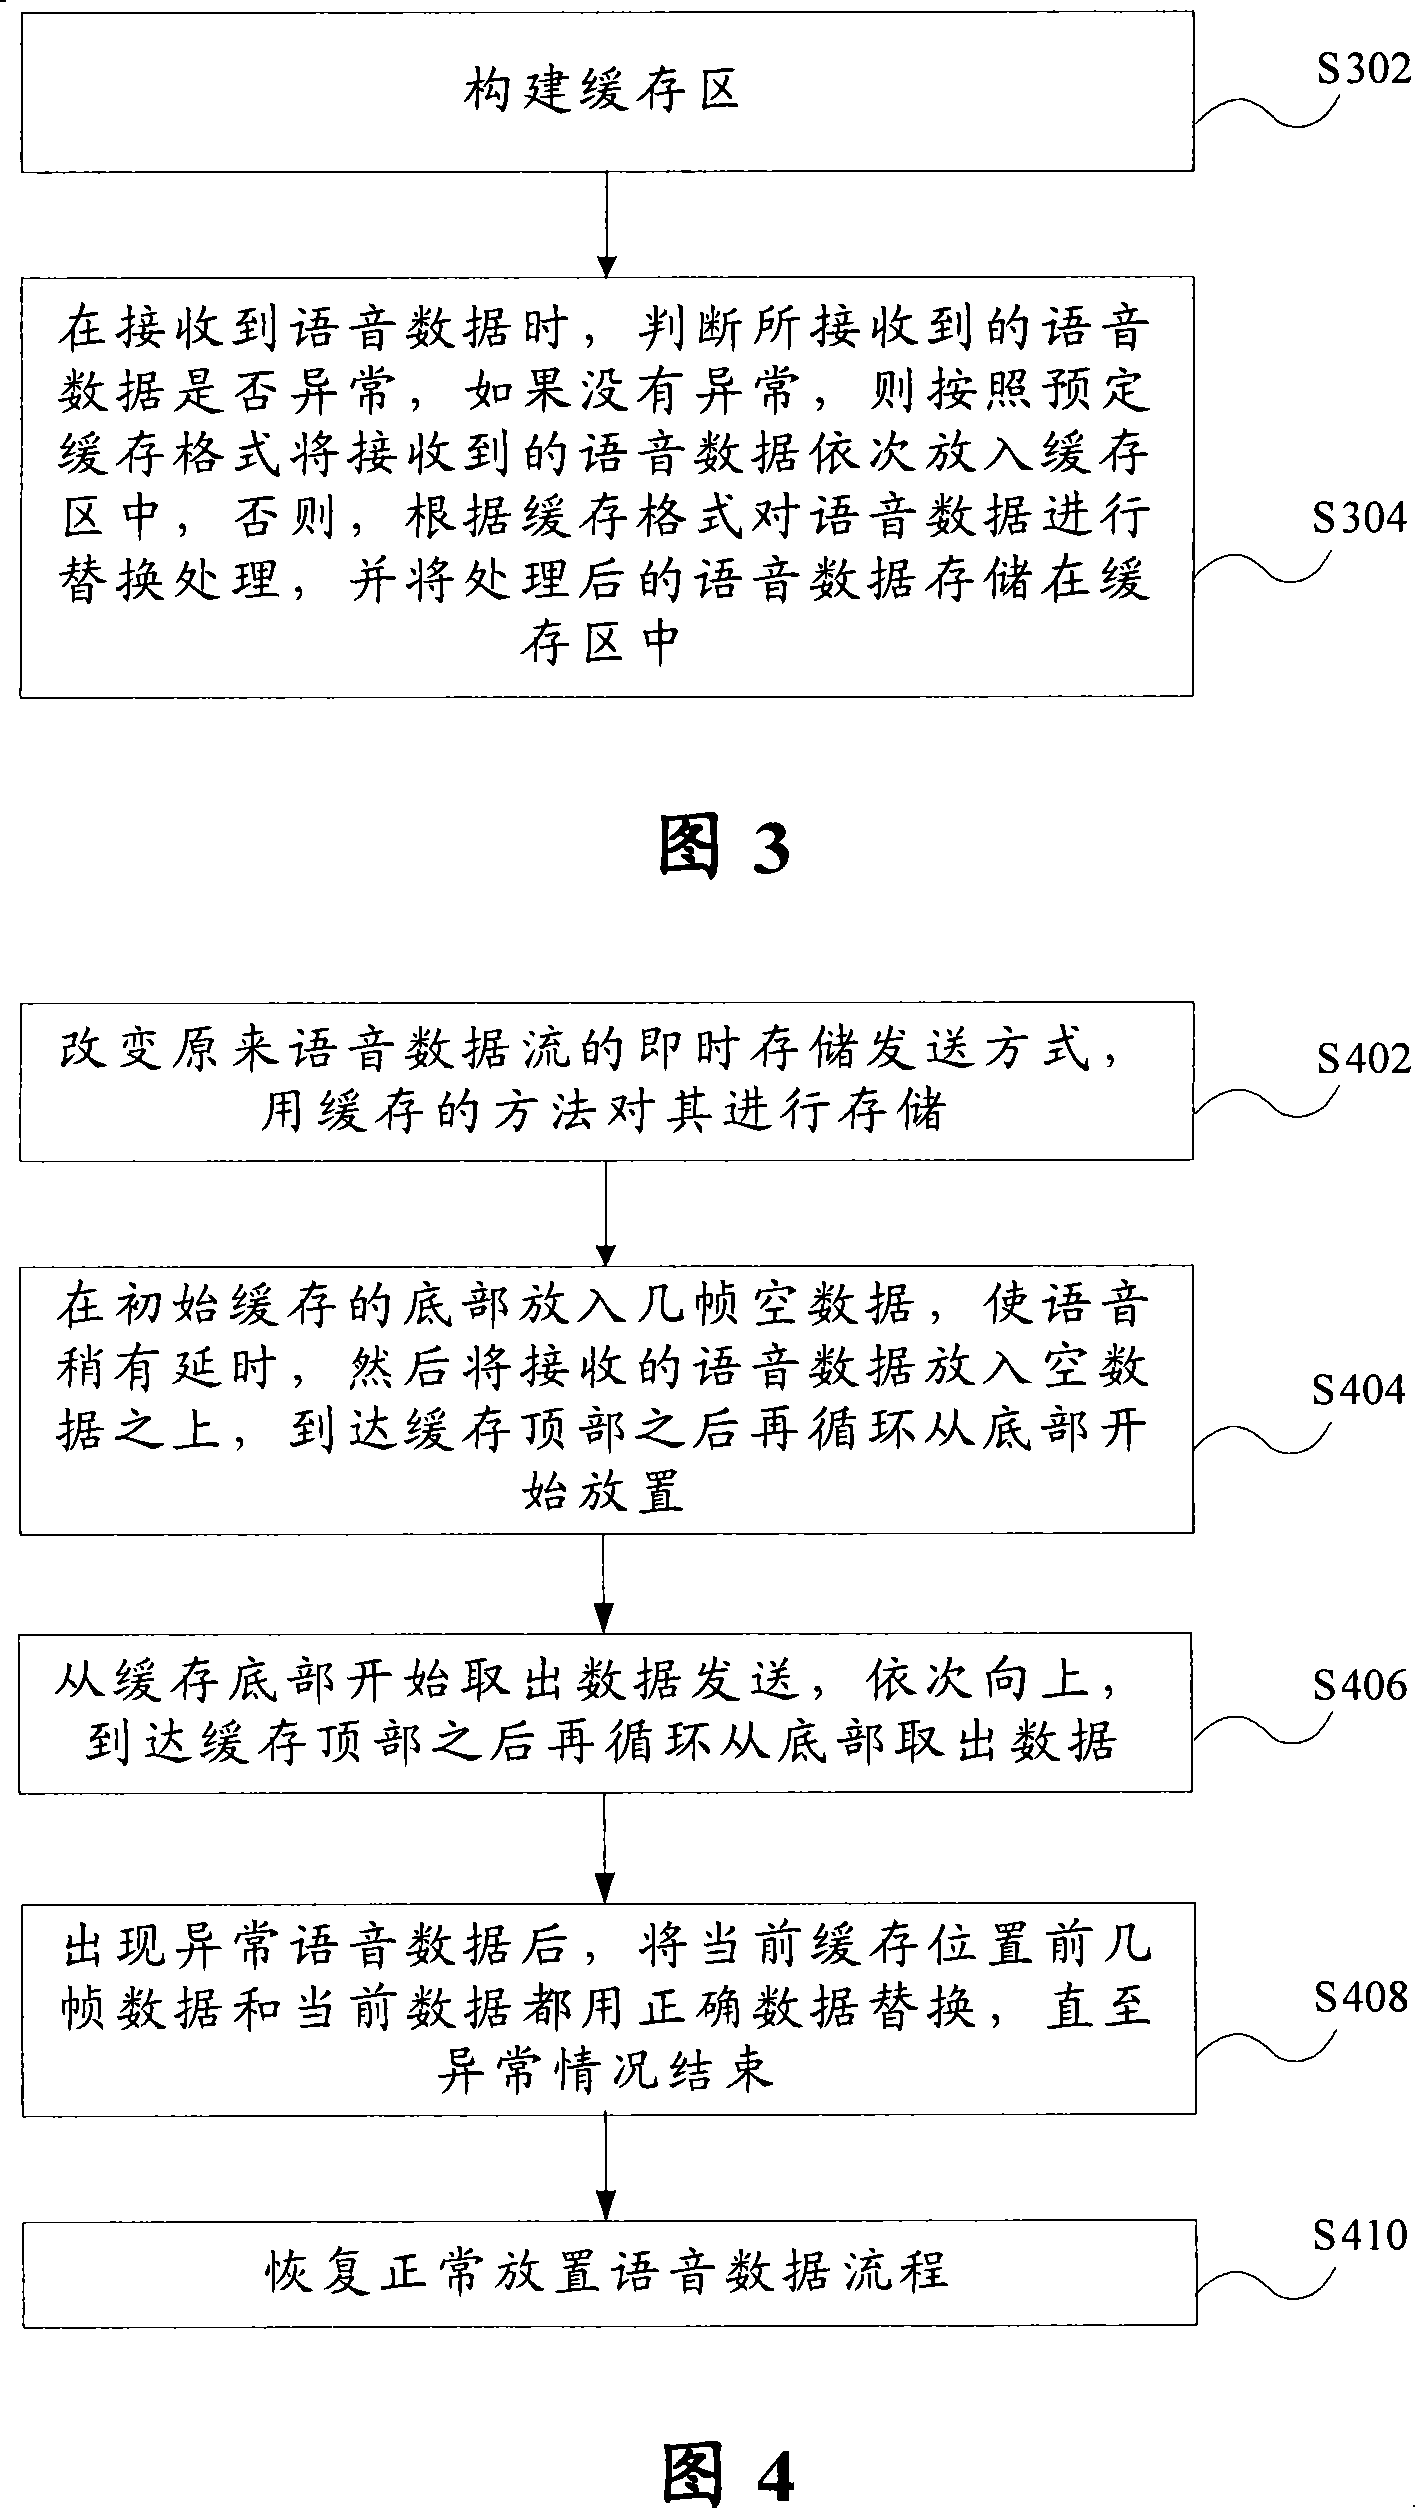 Abnormal voice data processing method and apparatus